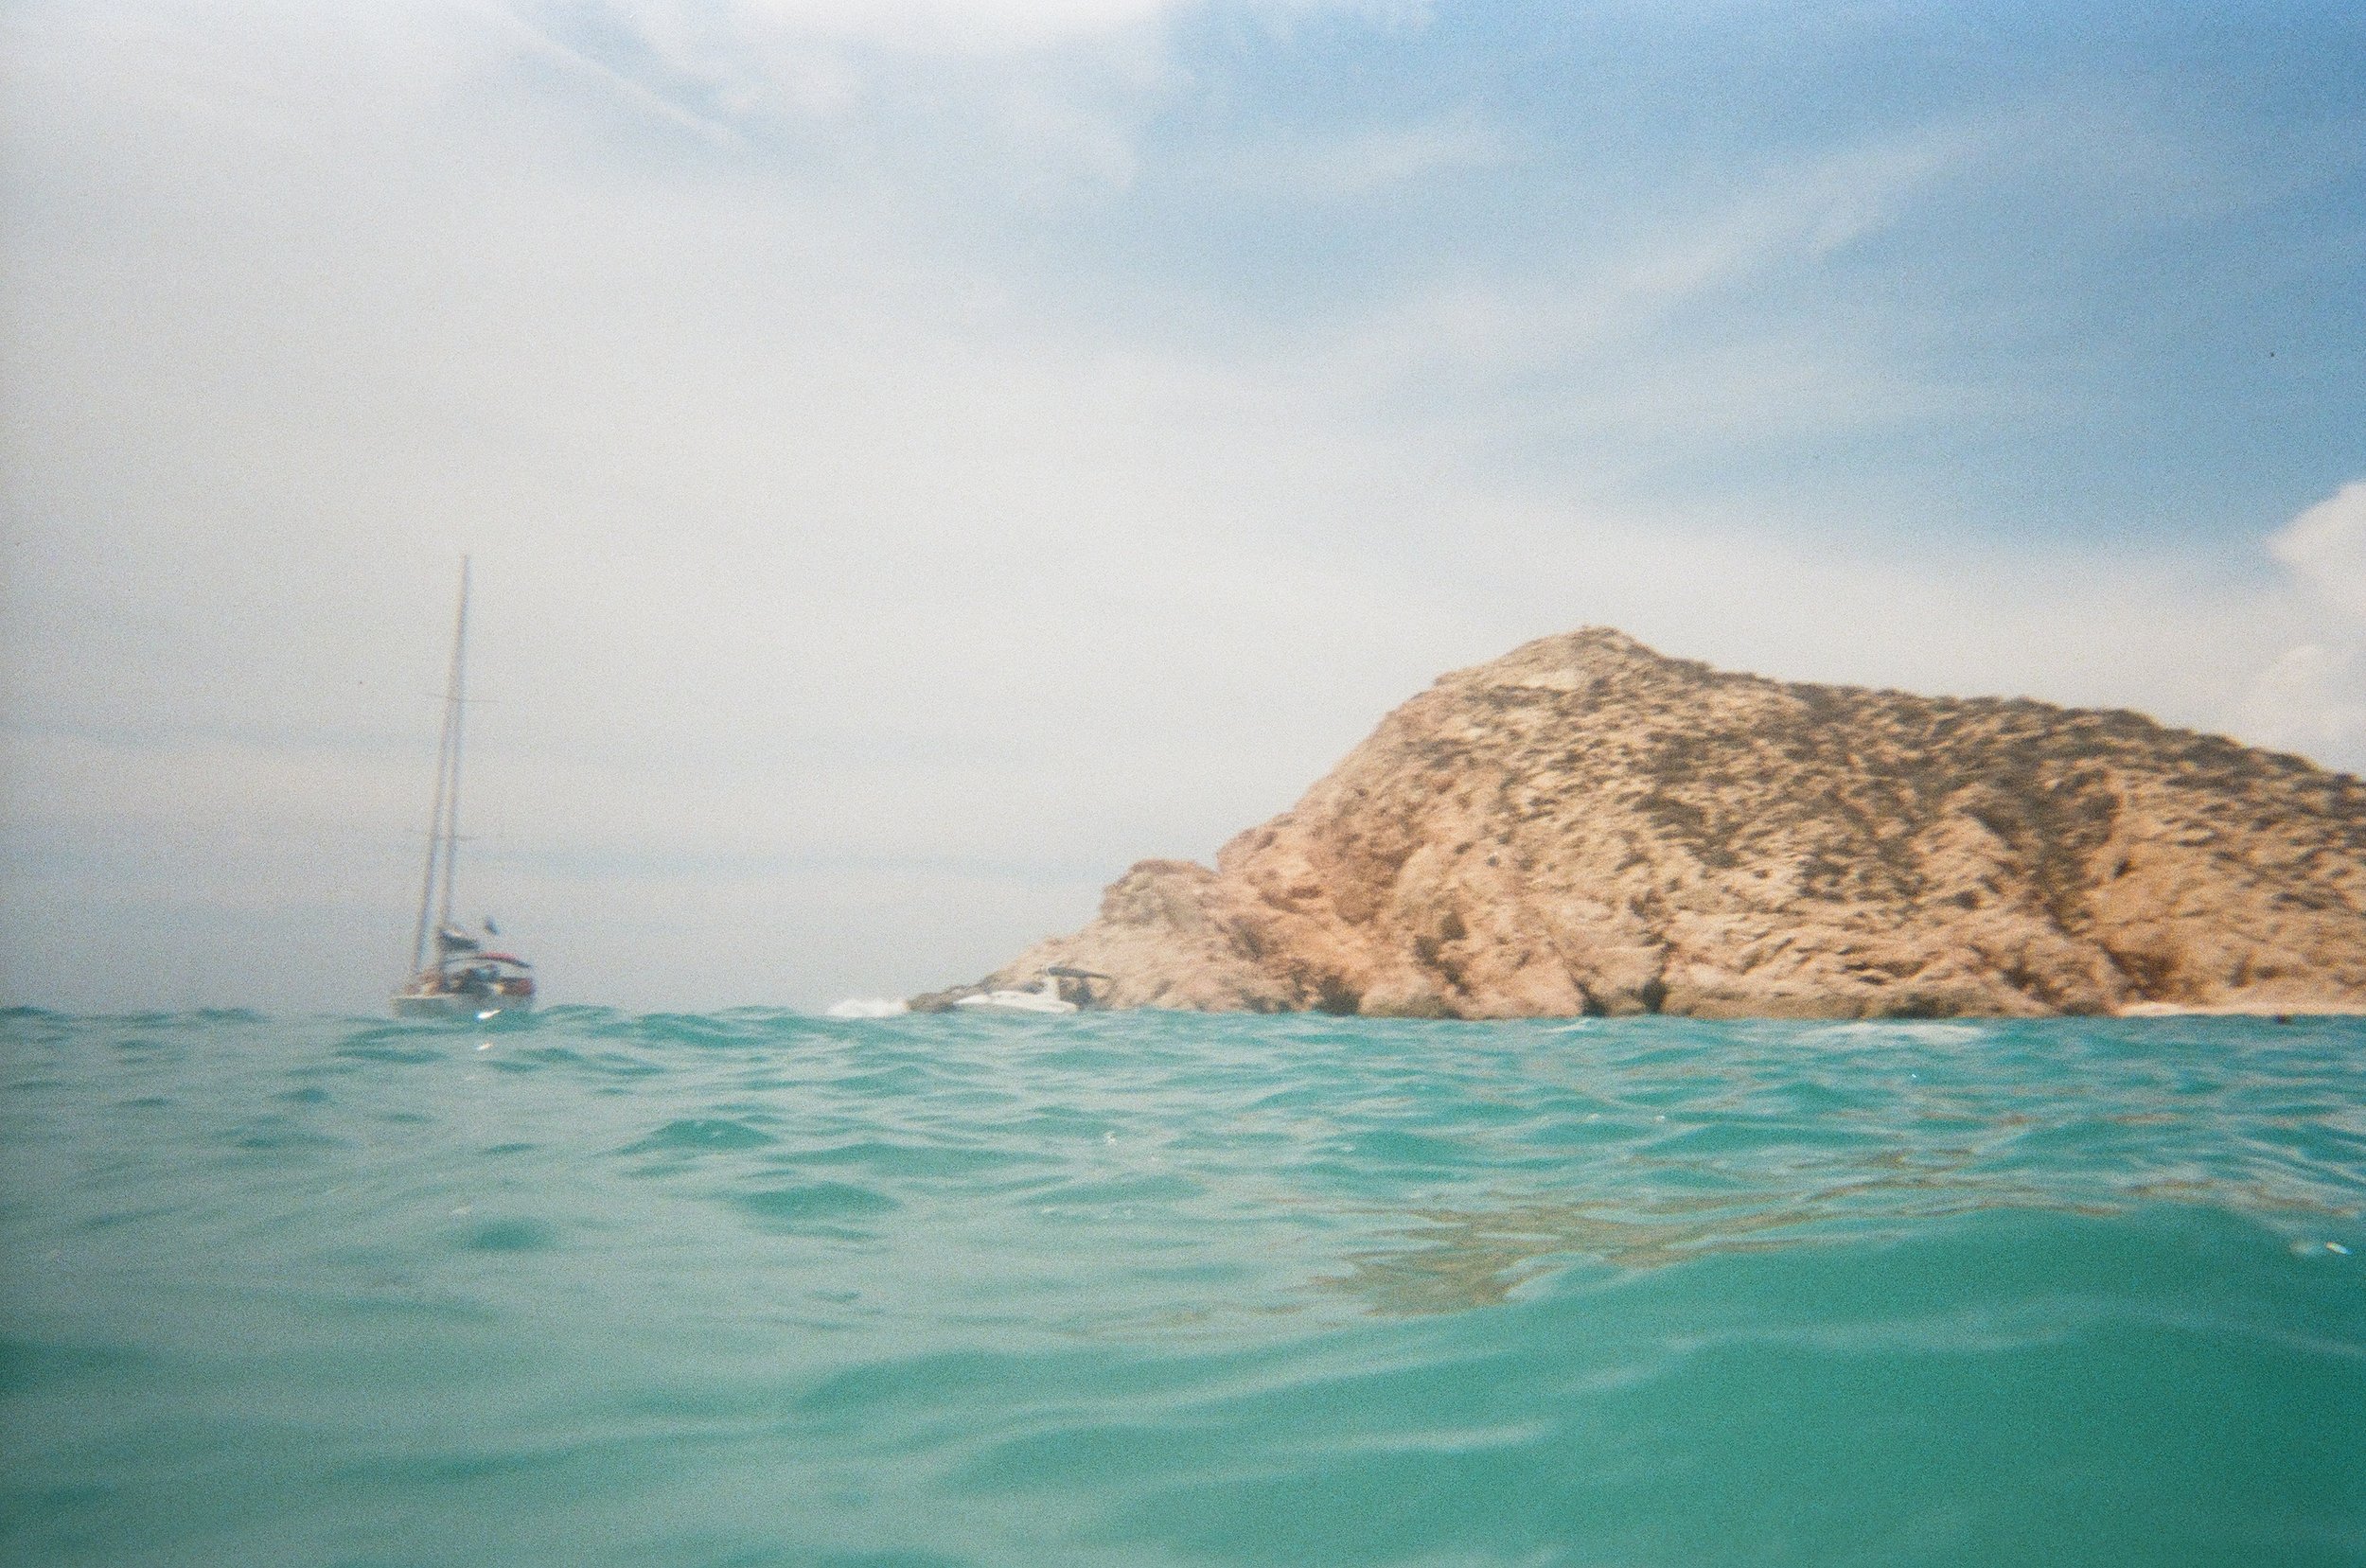 Cabo on film